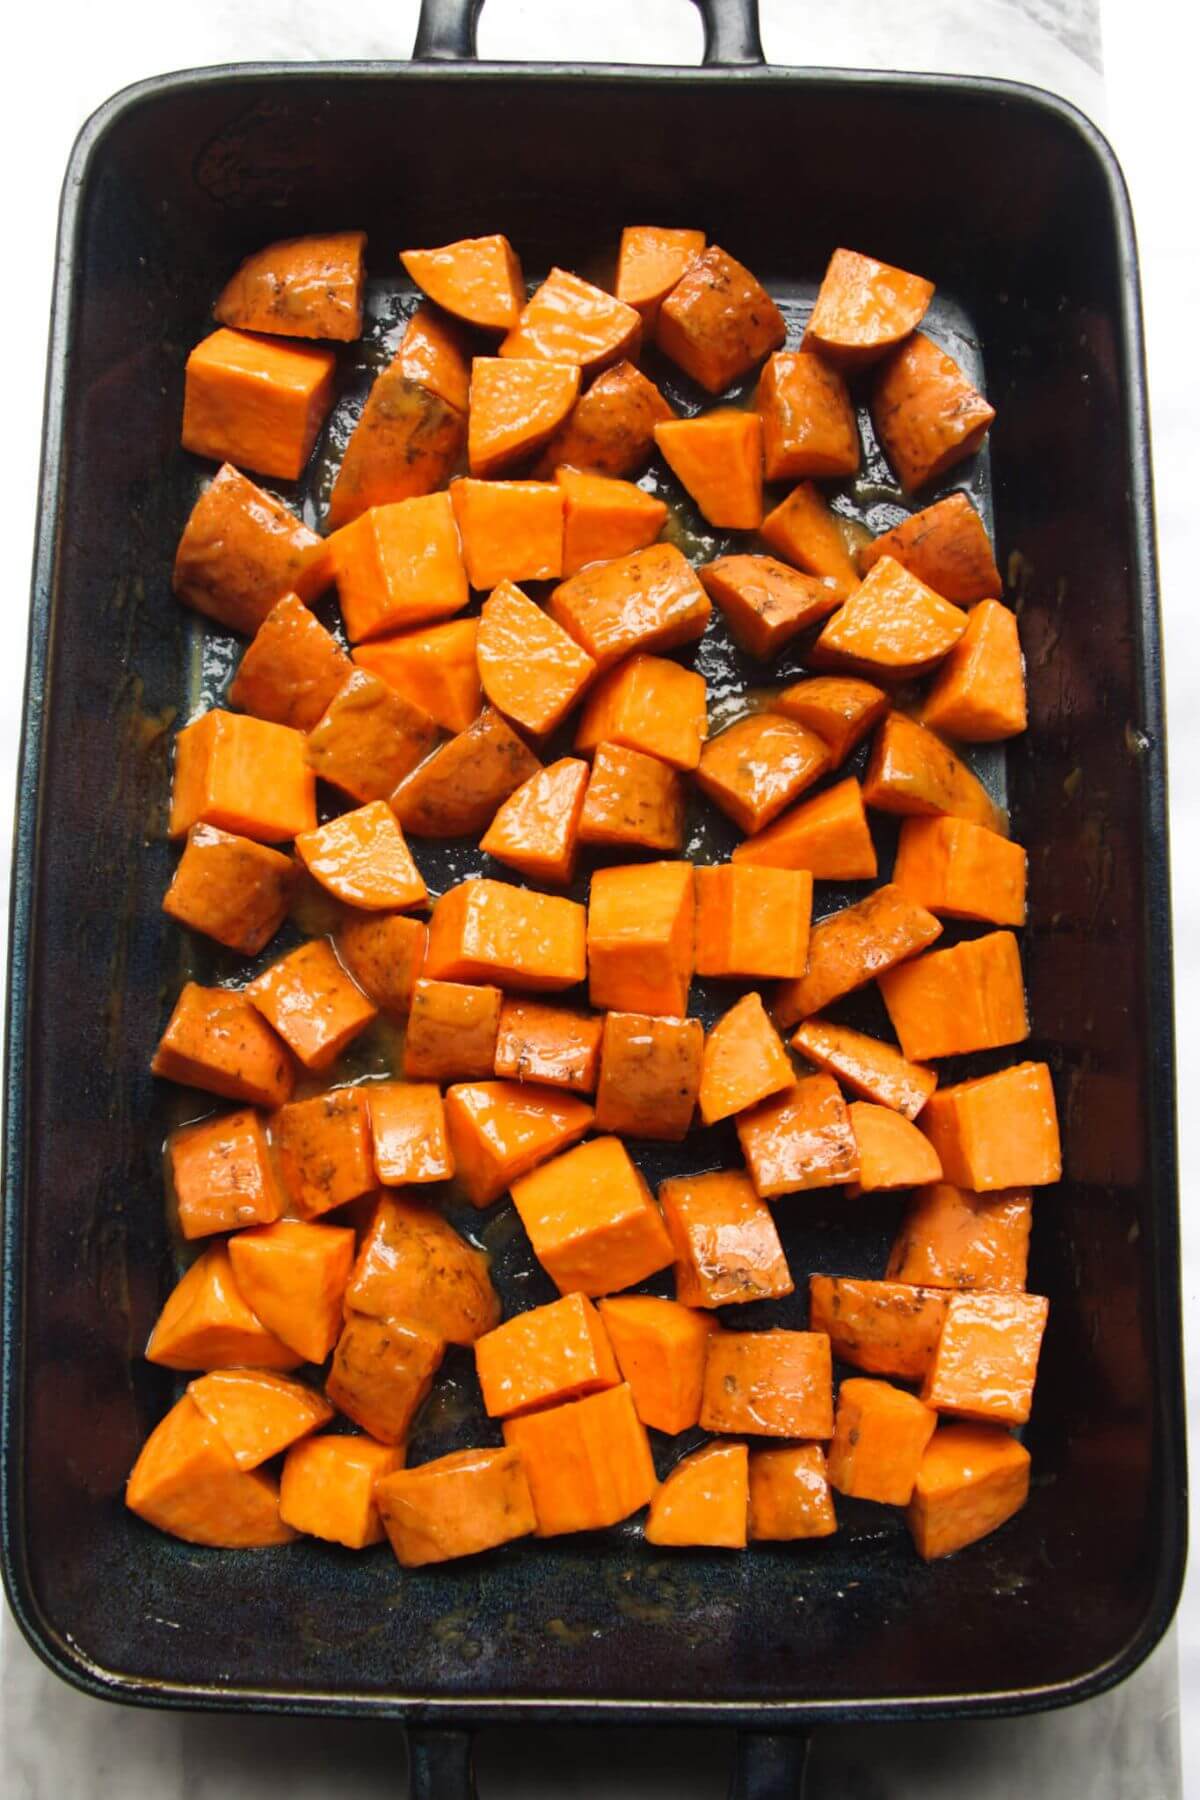 Miso glazed sweet potato chunks in a large blue oven dish ready to be roasted.